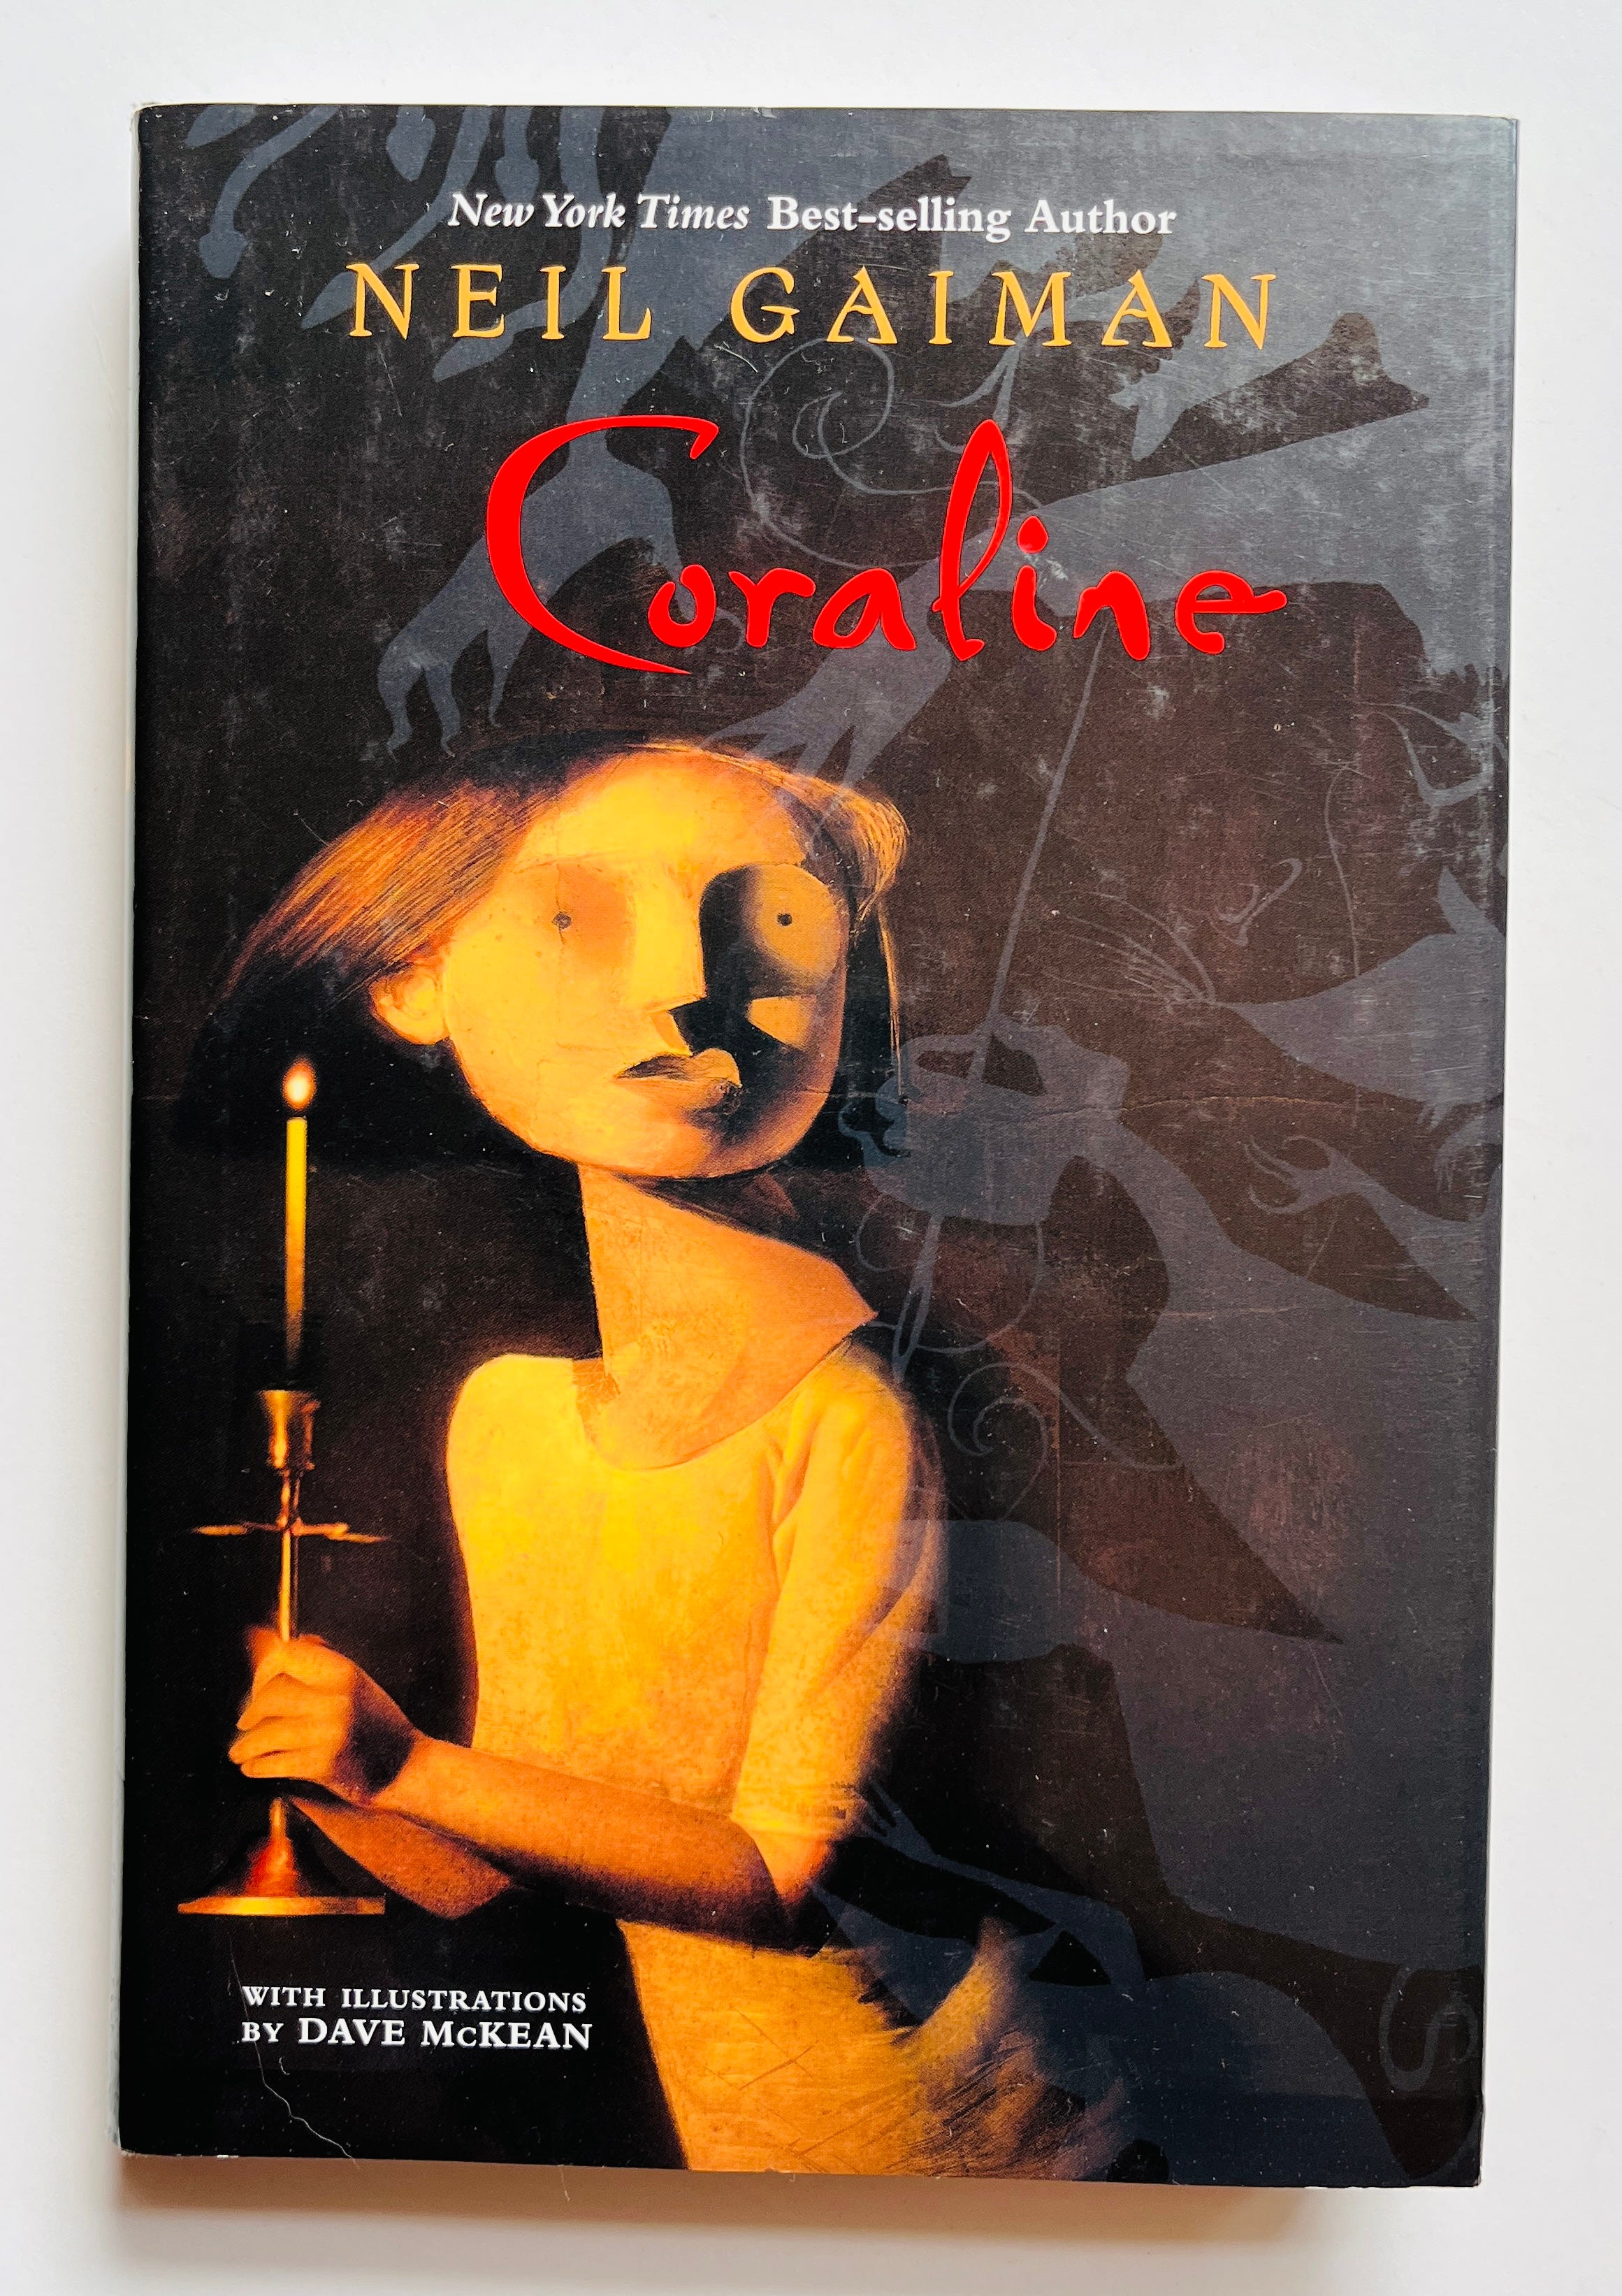 Coraline: read the book, watch the movie - by Sarah Miller